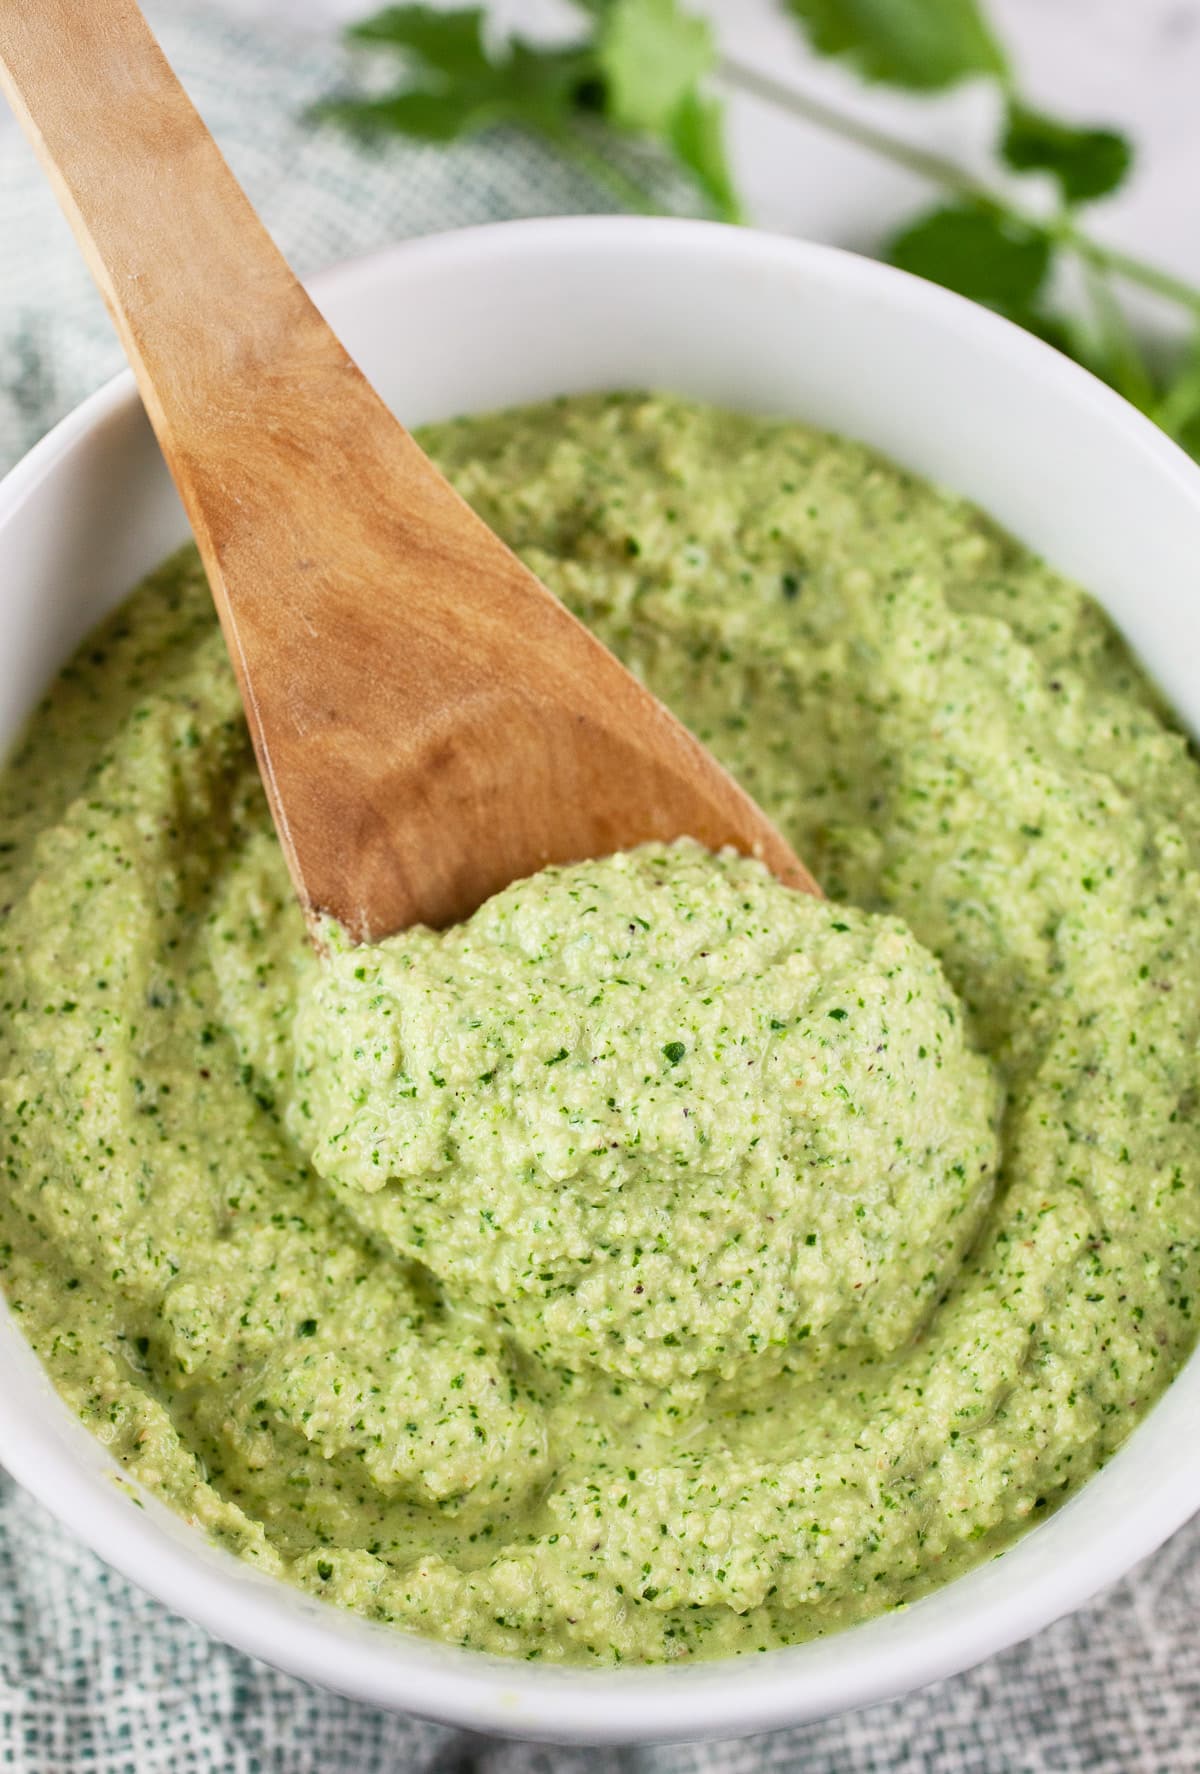 Cashew cilantro sauce with wooden spoon in white bowl.